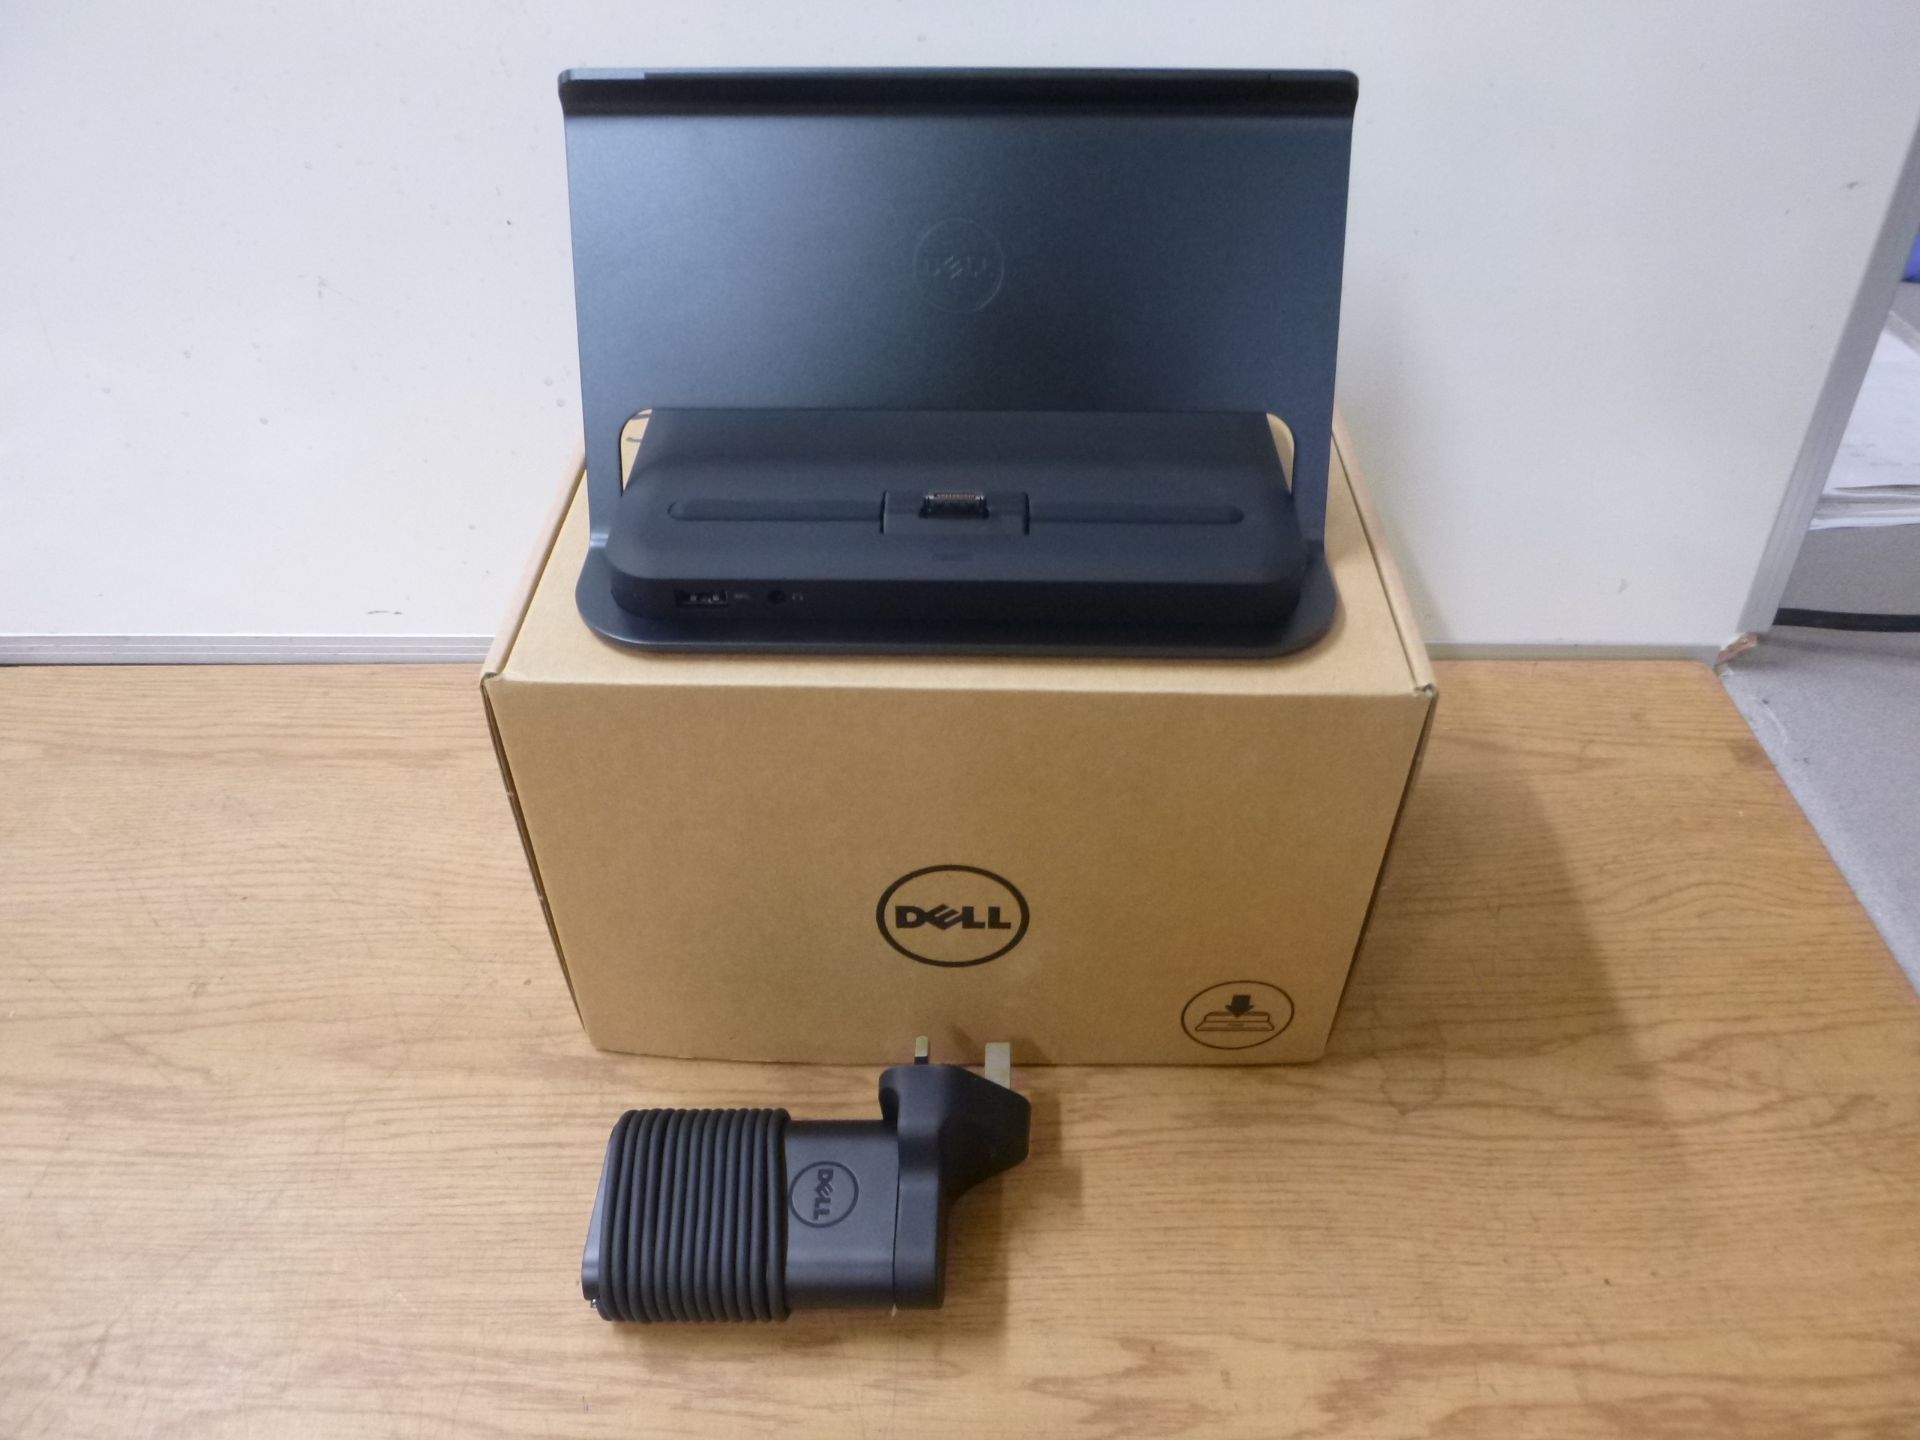 BOXED UNUSED Dell Venue 11 Pro Tablet Docking Station 5130 / 7130 / 7139 / 7140 / 7350. WITH PSU.